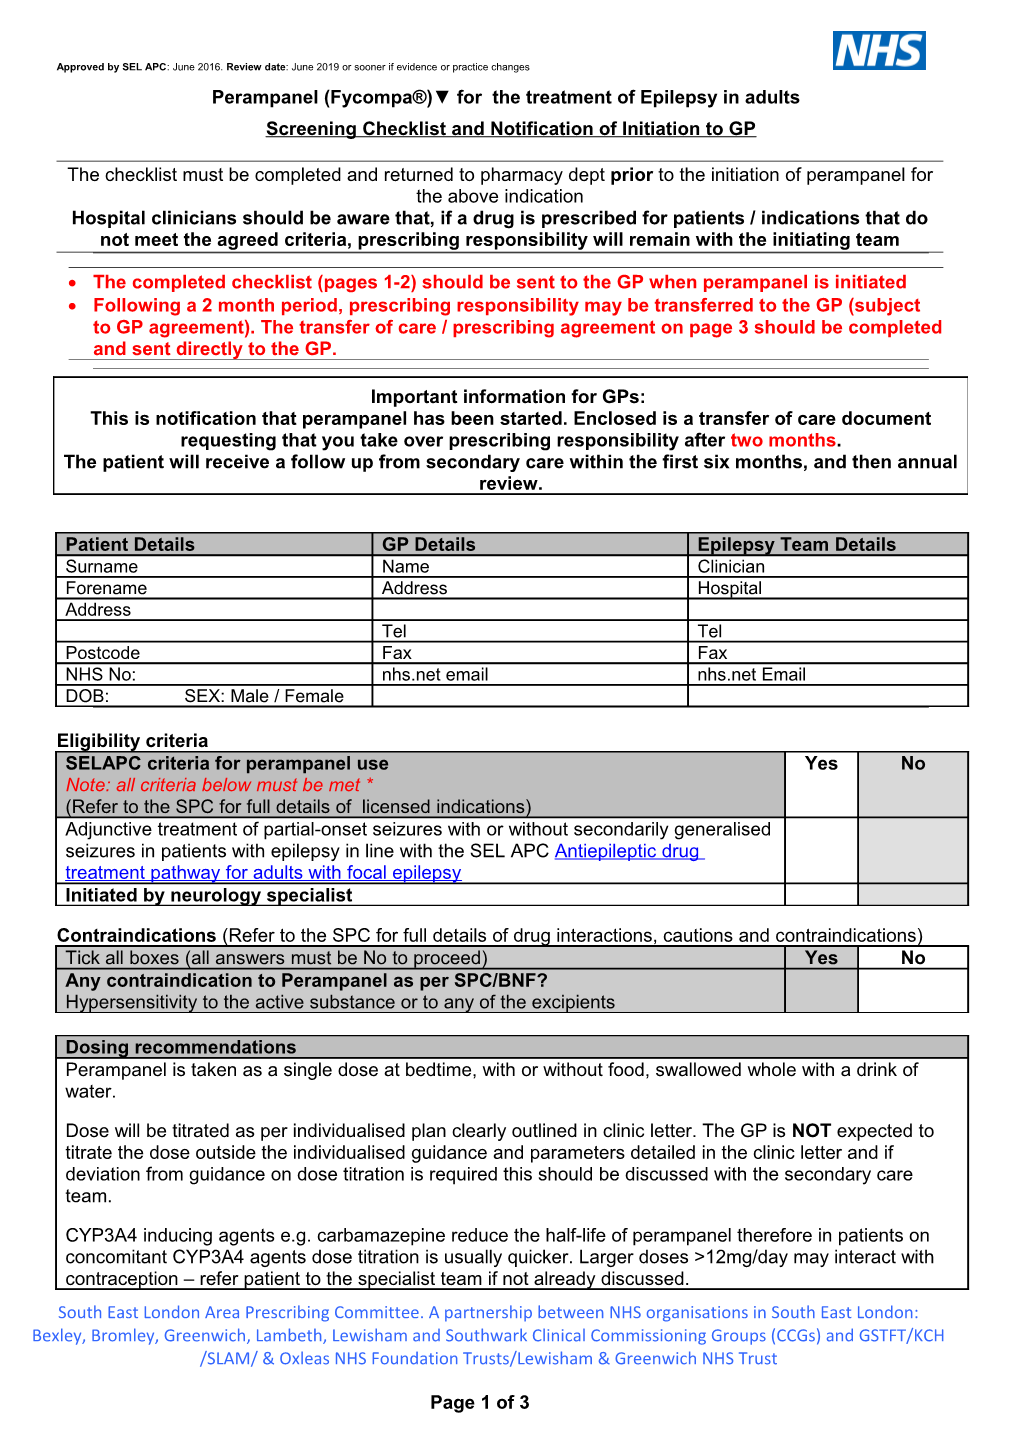 Screening Checklist and Notification of Initiation to GP